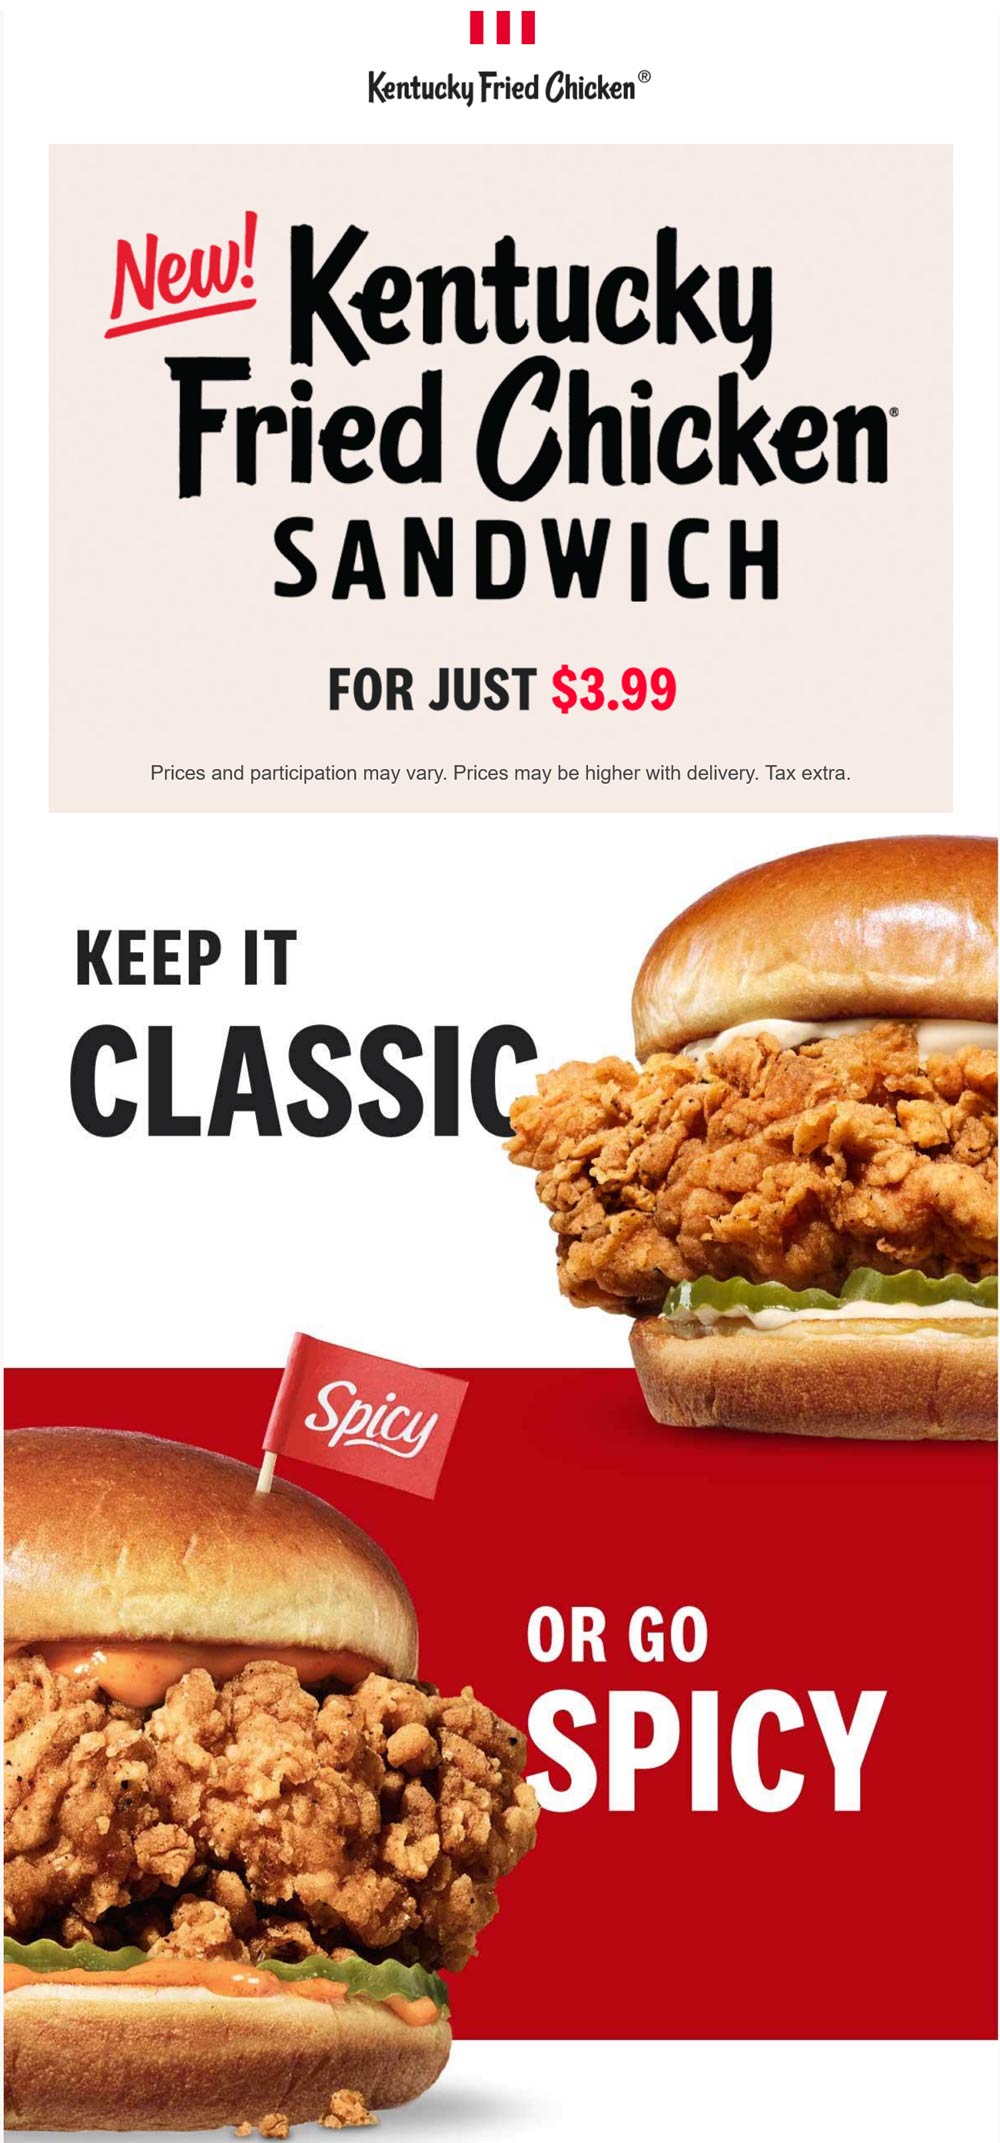 4-fried-chicken-sandwich-at-kfc-kfc-the-coupons-app